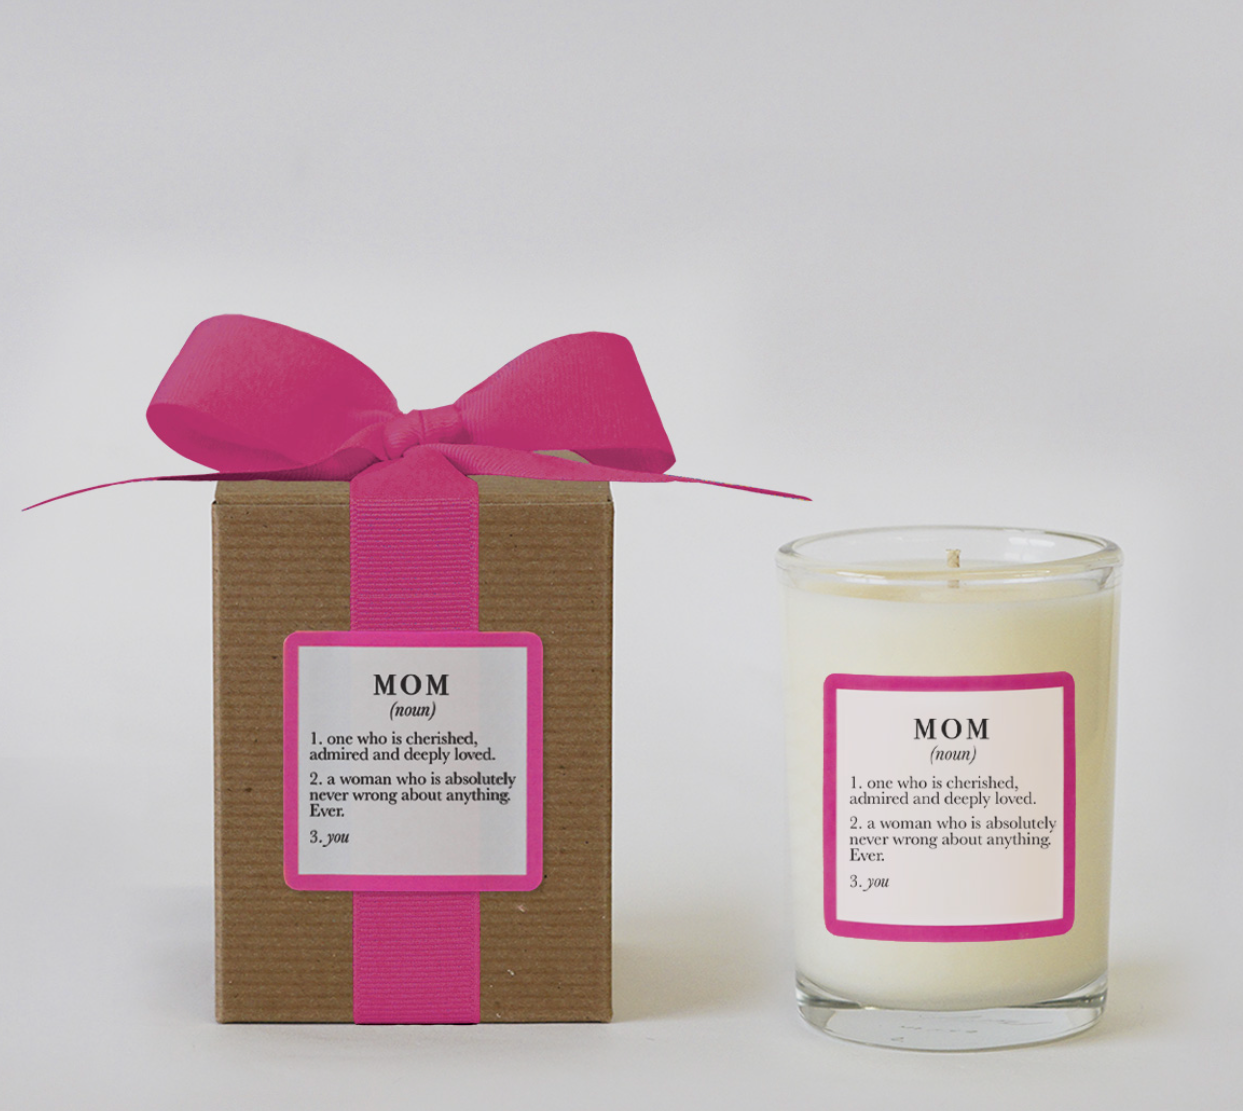 Mother's Day Gifts and Decor